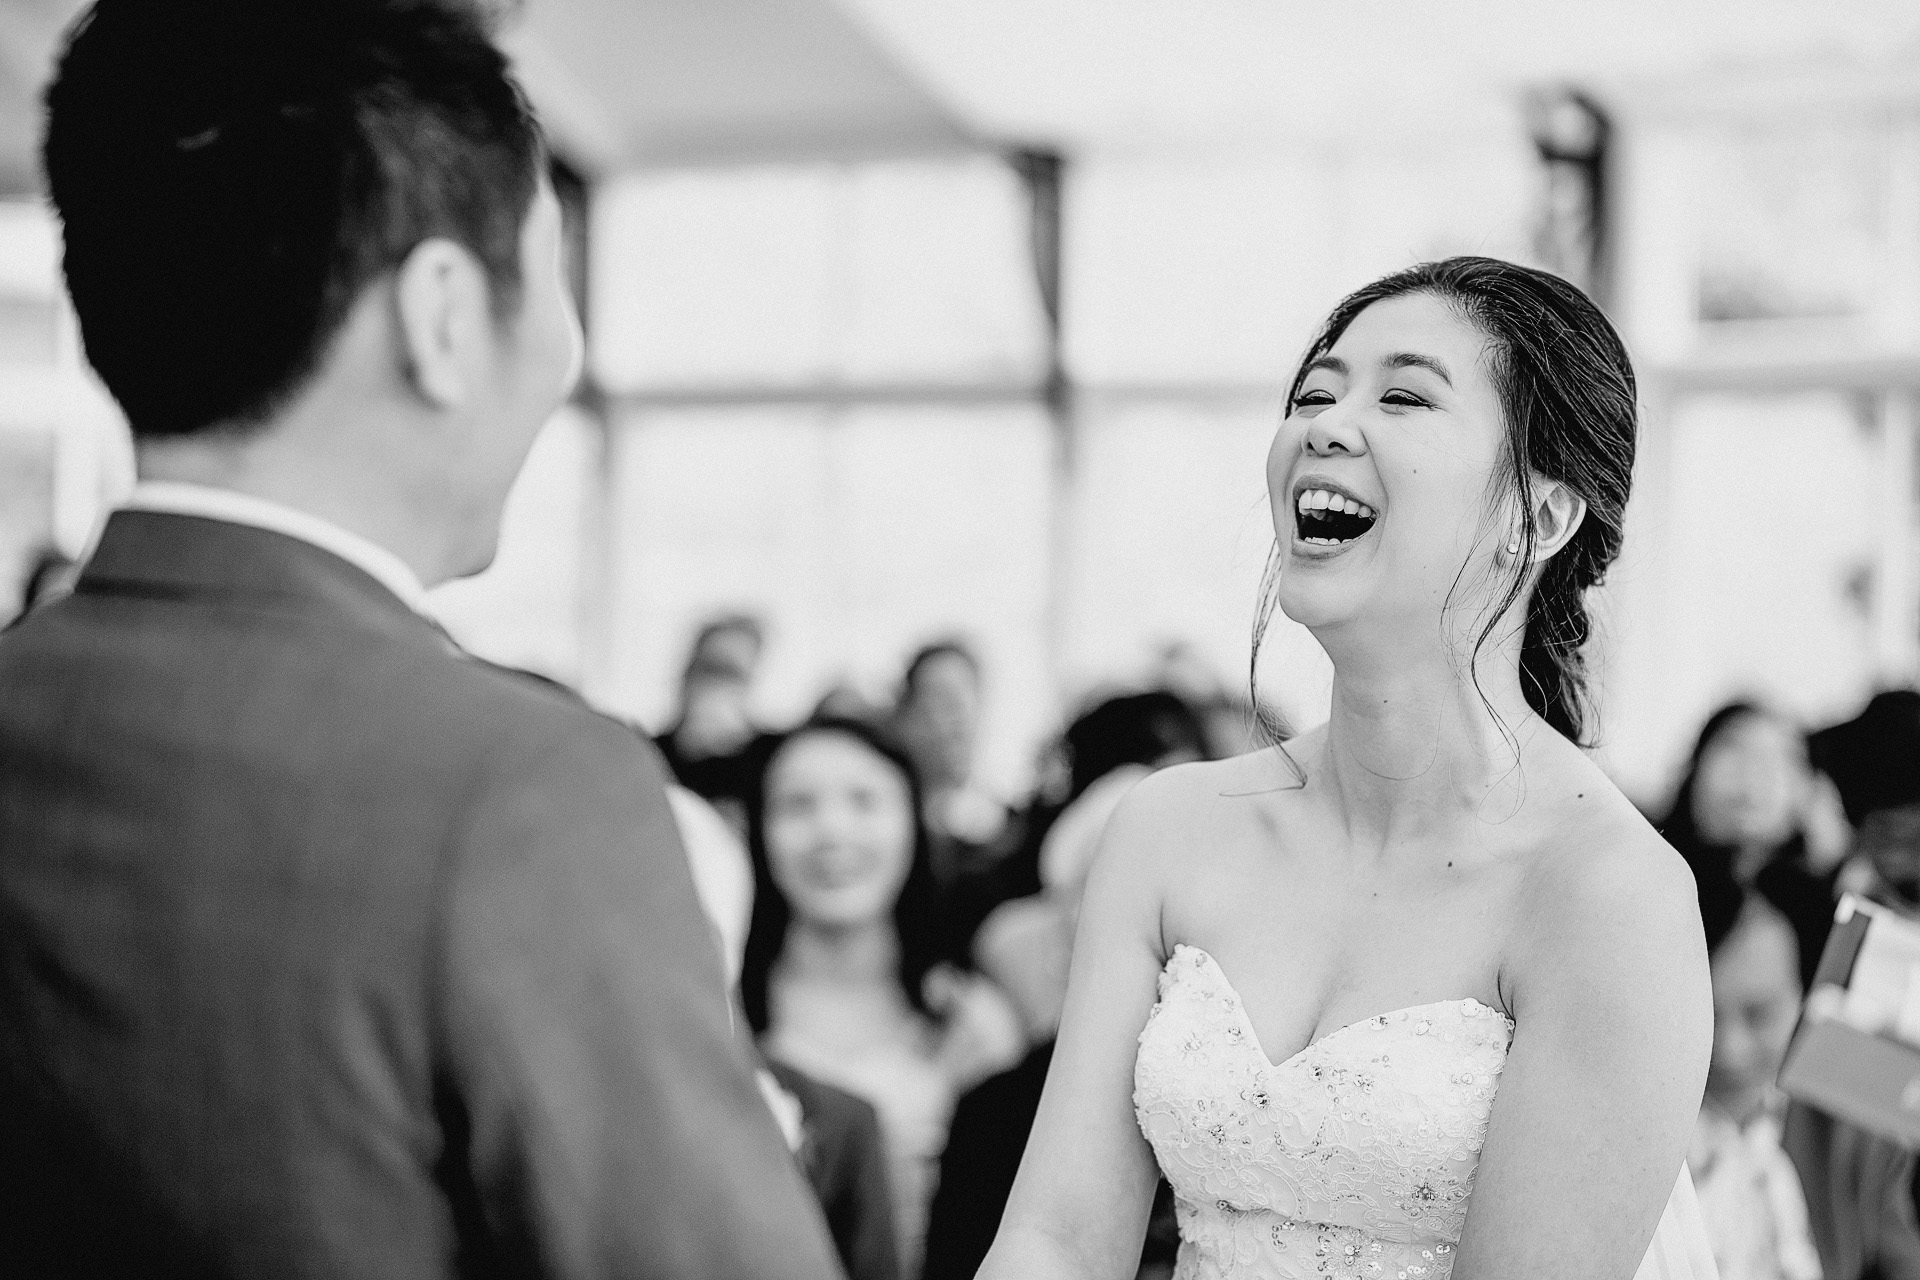 laughing during the civil marriage